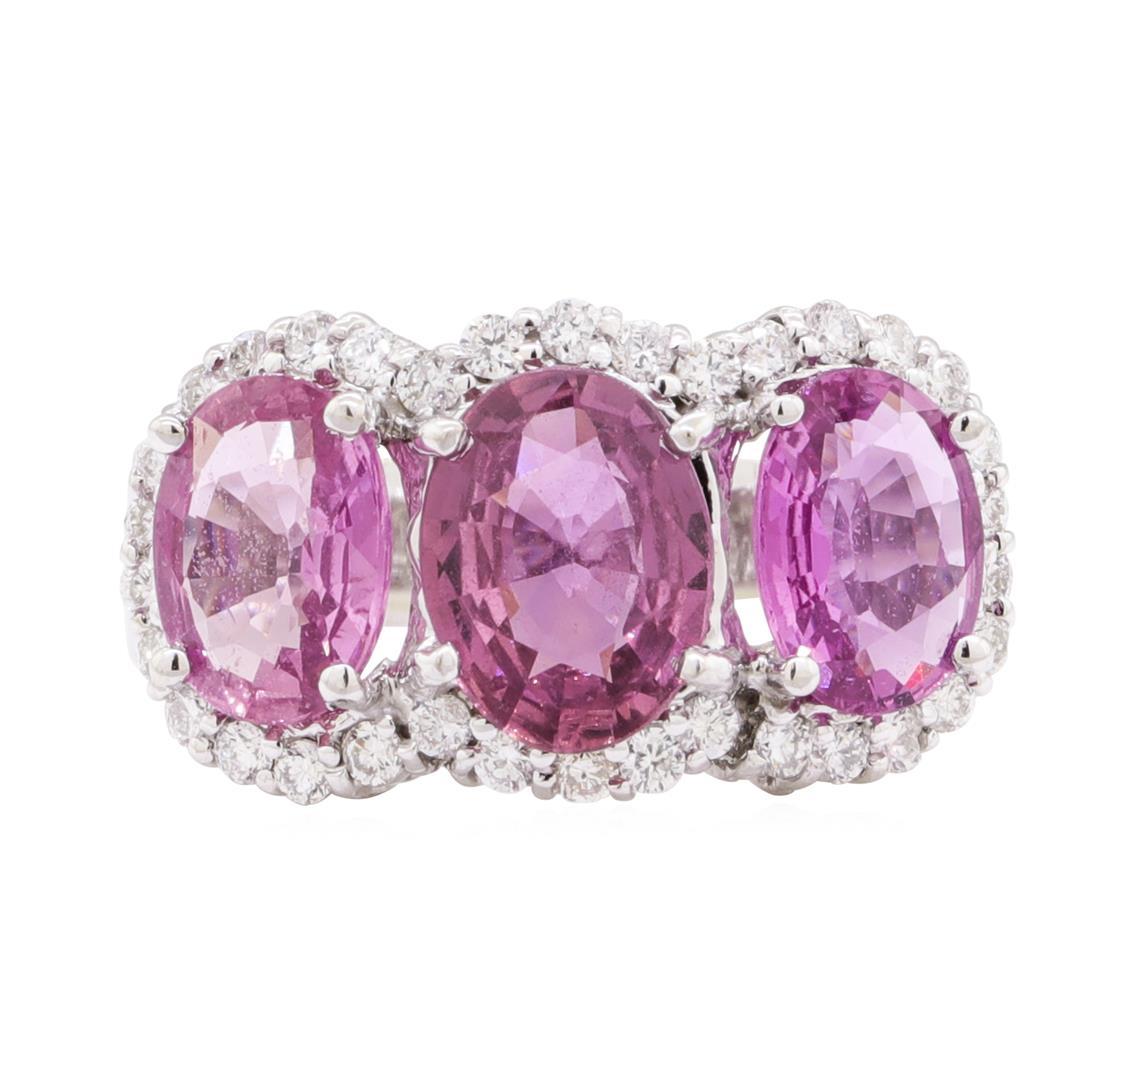 4.67 ctw Pink Sapphire and Diamond Ring - 14KT White Gold